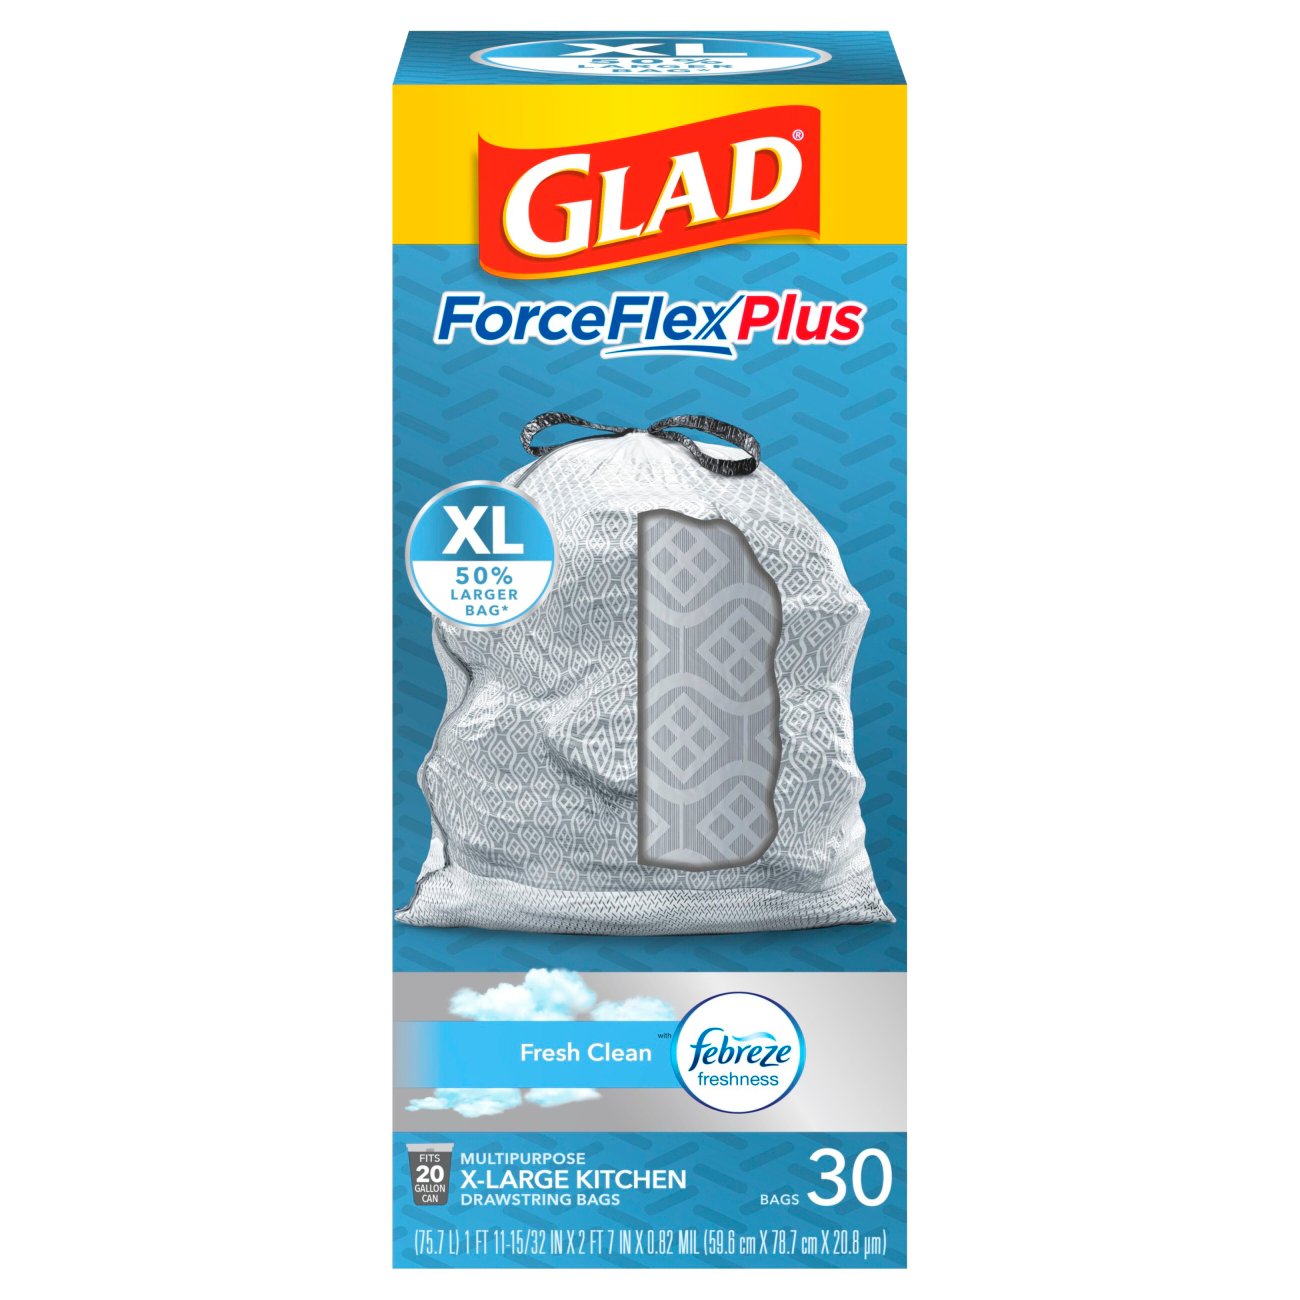 NEW 144 GLAD WAVETOP TIE LARGE 10 GALLON SCENTED TRASH BAGS,2 VALUE PACKS OF 72 